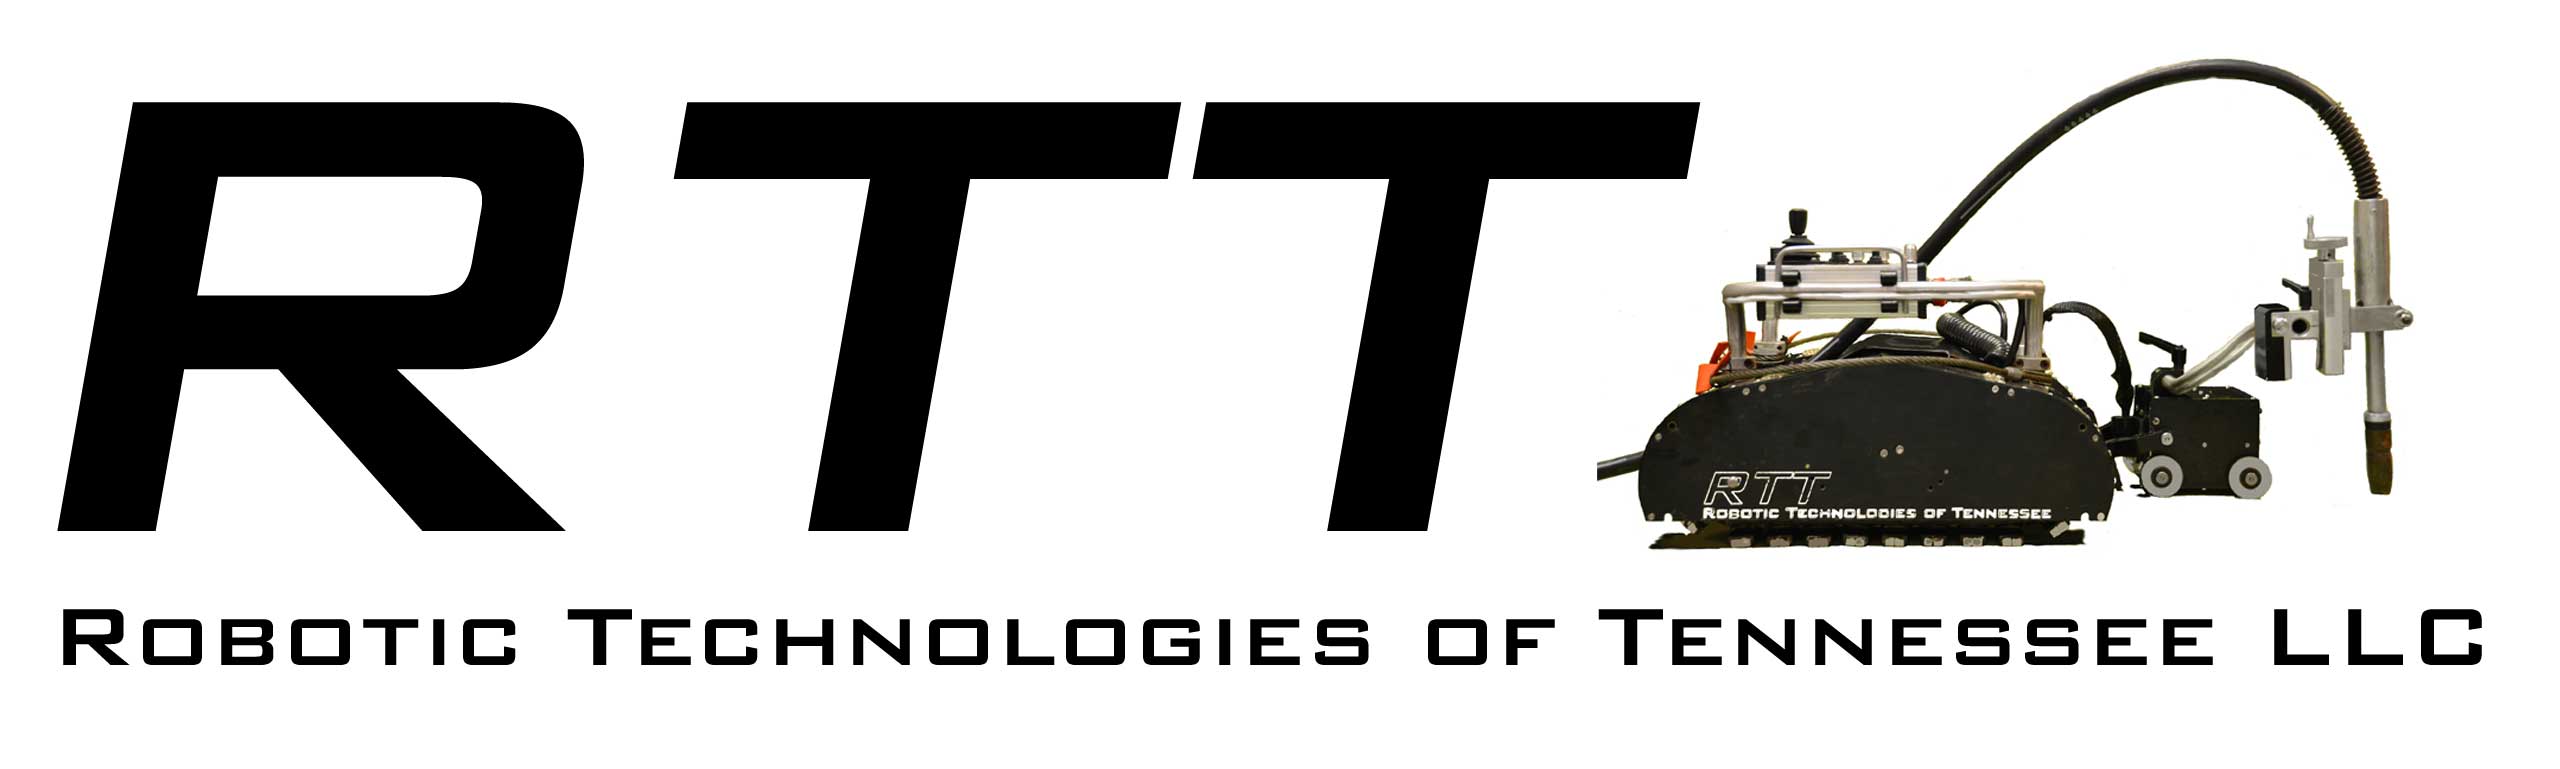 Robotic Technologies of Tennessee